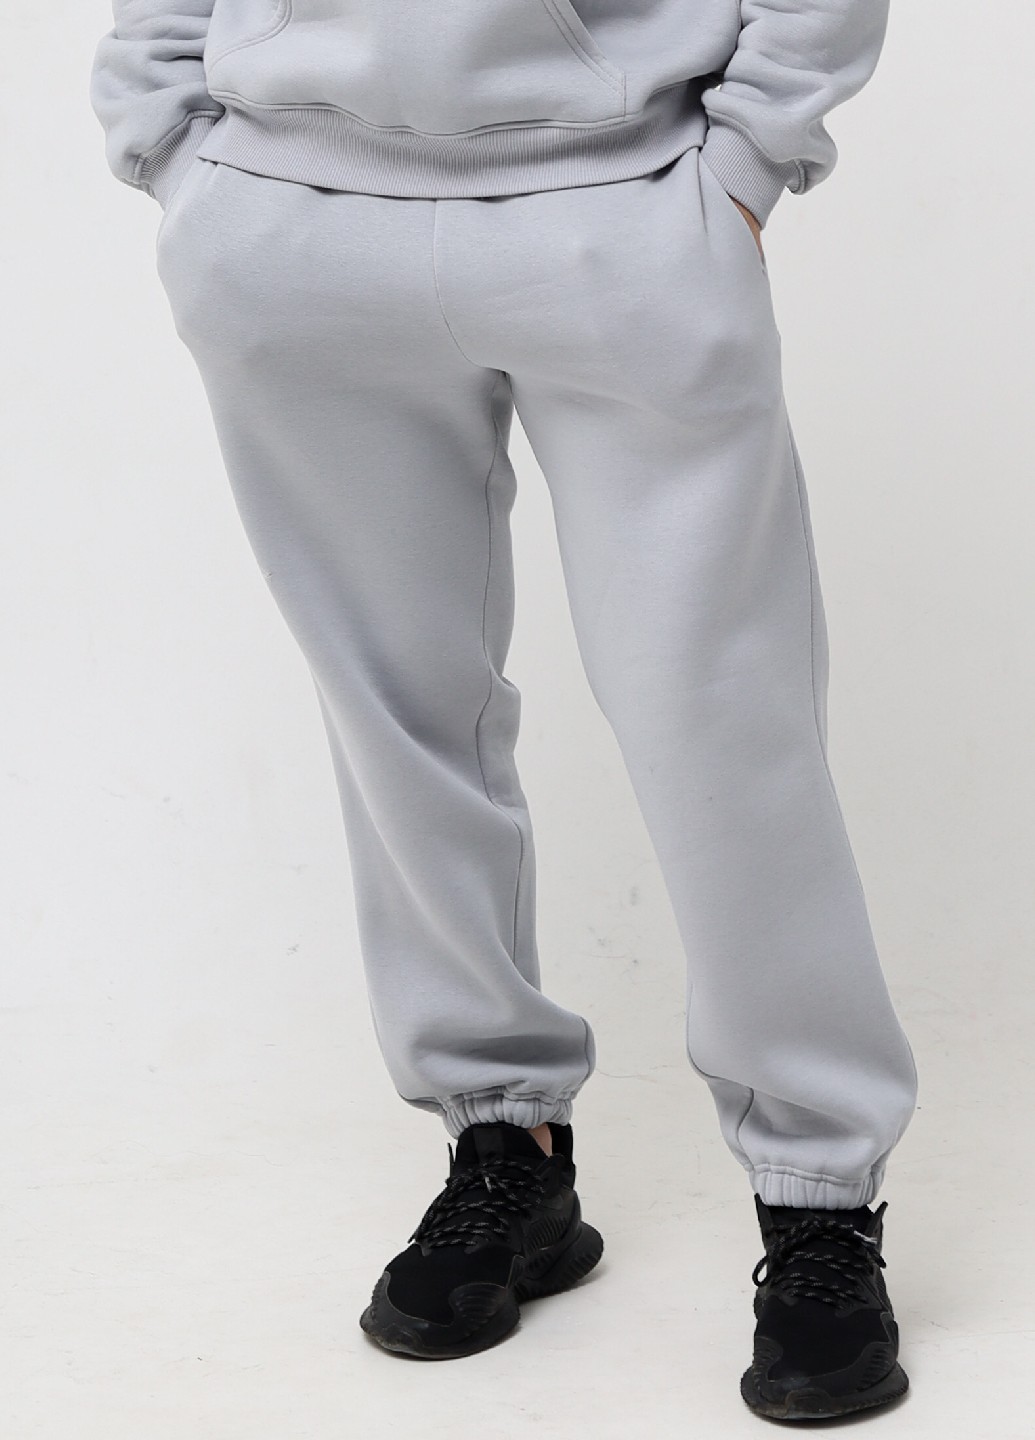 Basic Active Cotton Jogger Pants with Fleece | Grey color | Made in Ukraine | Rebellis